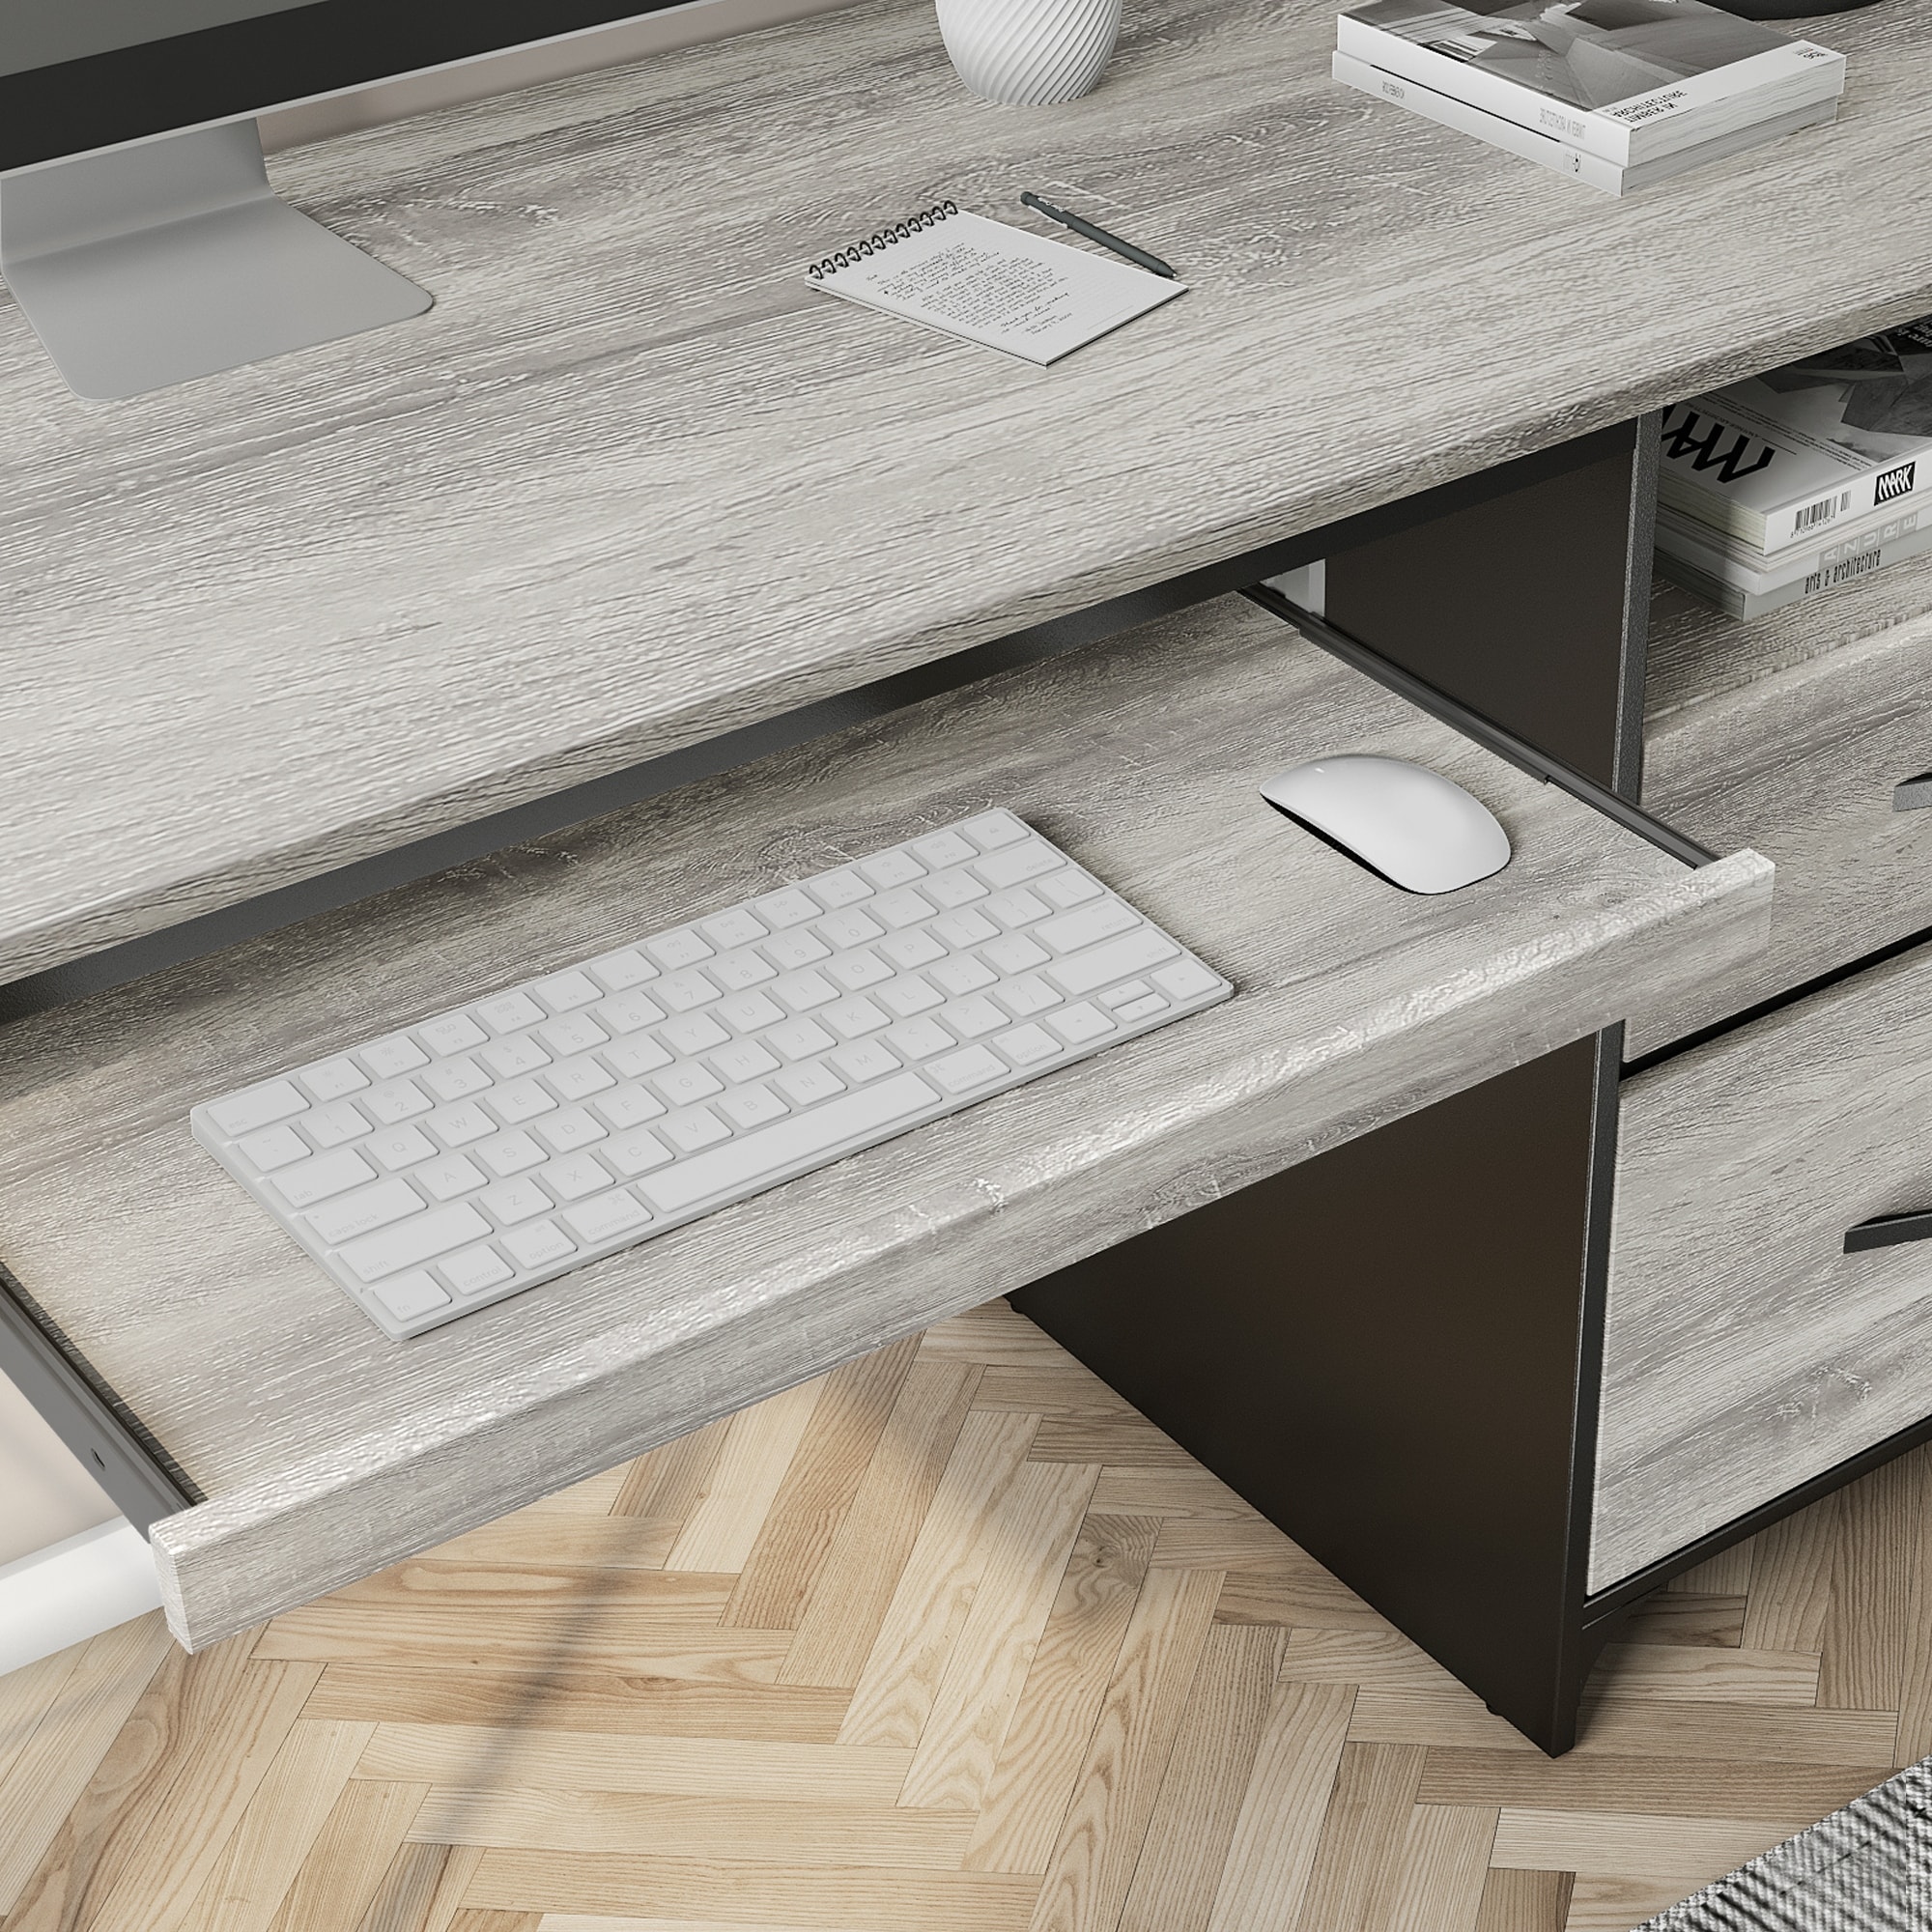 https://ak1.ostkcdn.com/images/products/is/images/direct/2fa590f6539fd0963a03247019431e8f4d7c2c8a/Bestier-55-inch-Computer-Desk-with-Storage-Drawers-and-Keyboard-Tray.jpg